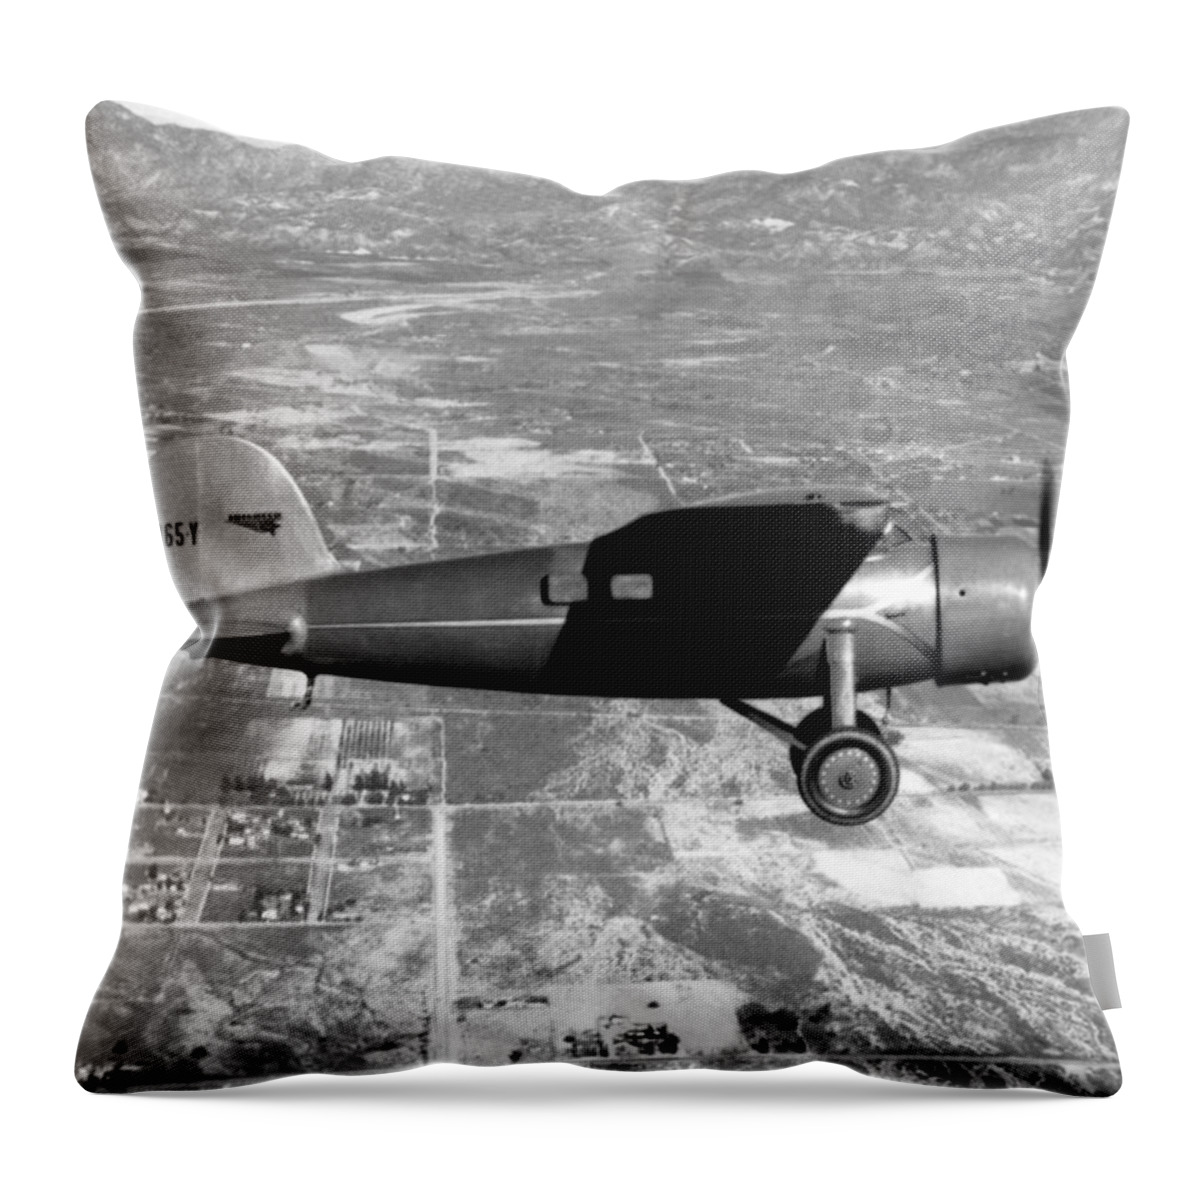 1934 Throw Pillow featuring the photograph Amelia Earhart in her plane by Underwood Archives